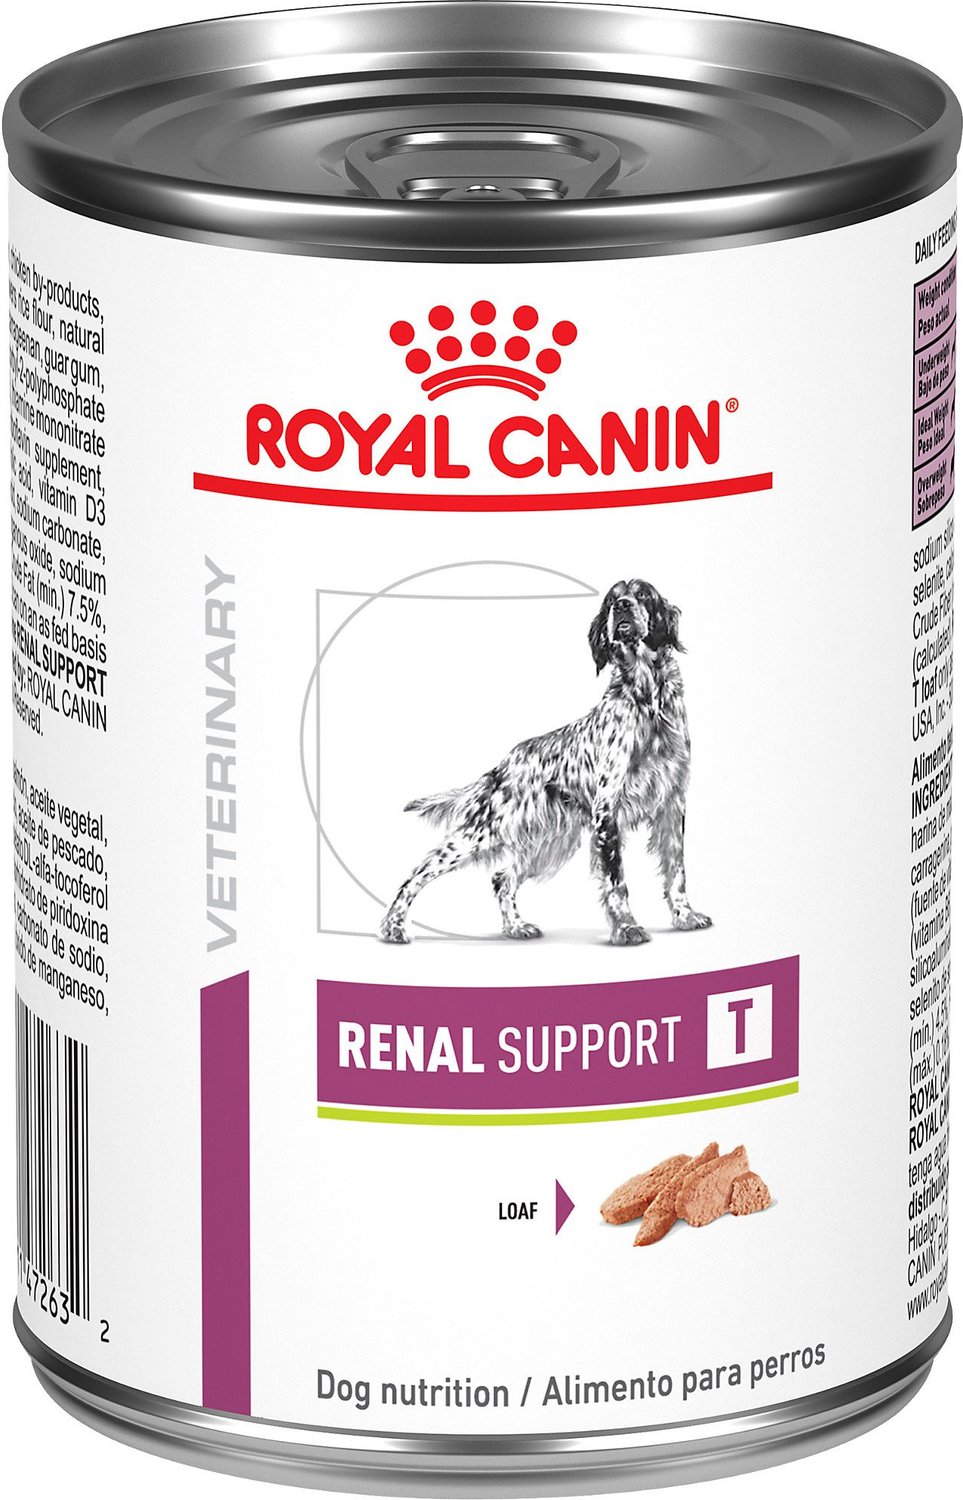 ROYAL CANIN VETERINARY DIET Renal Support T Canned Dog Food, 13.5oz